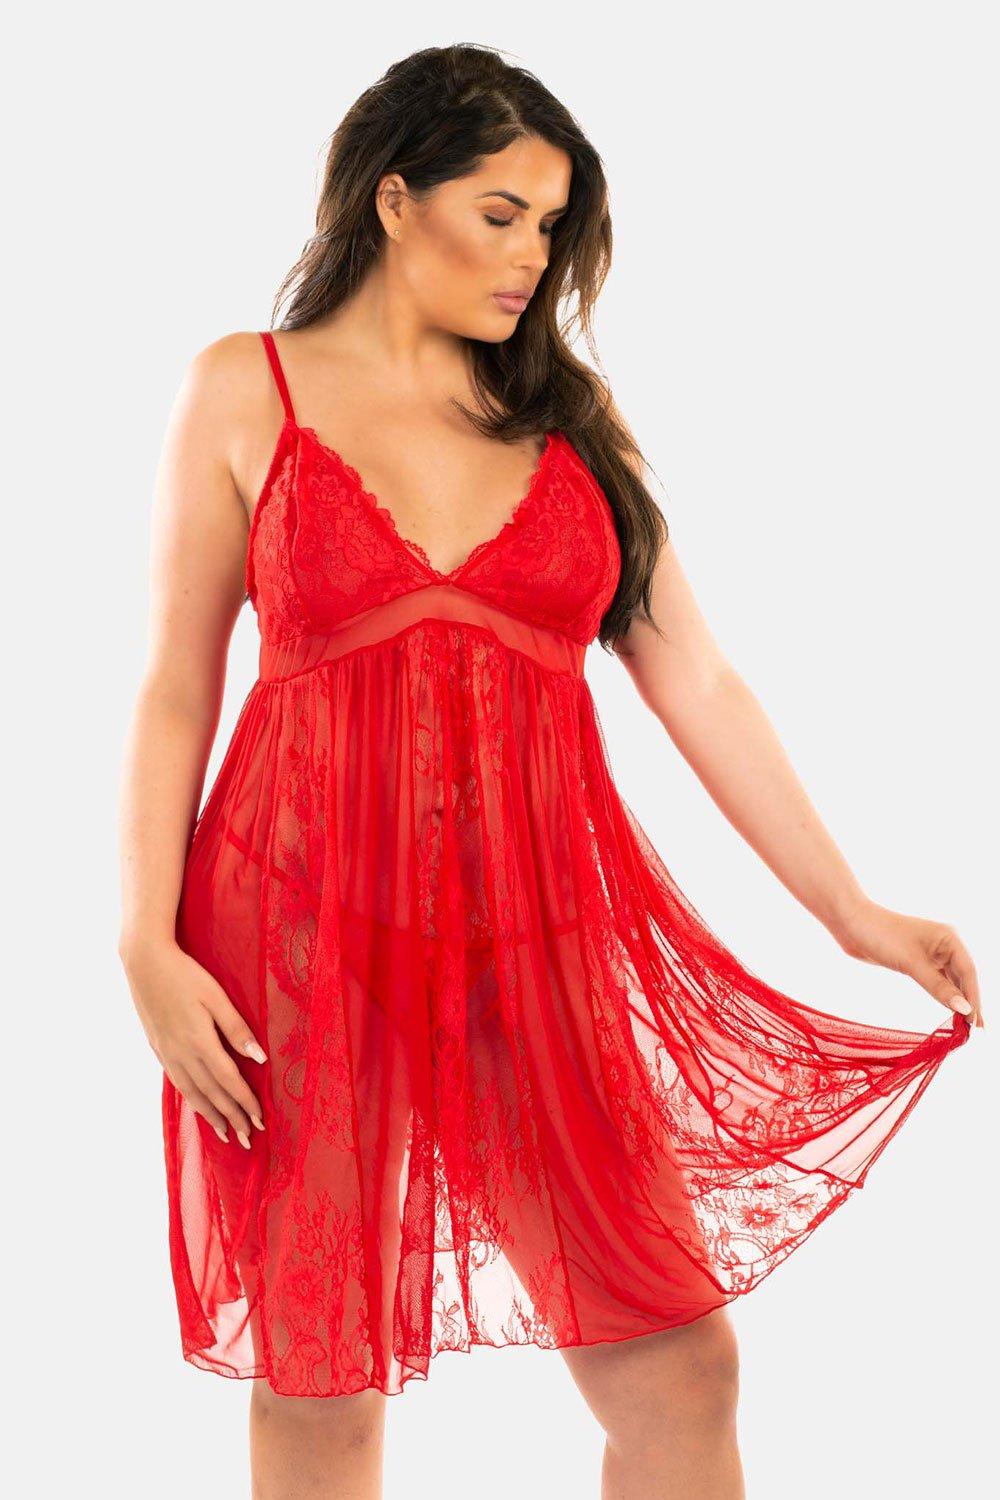 Isie Lace & Mesh Plus Size Nightwear with Matching Thong